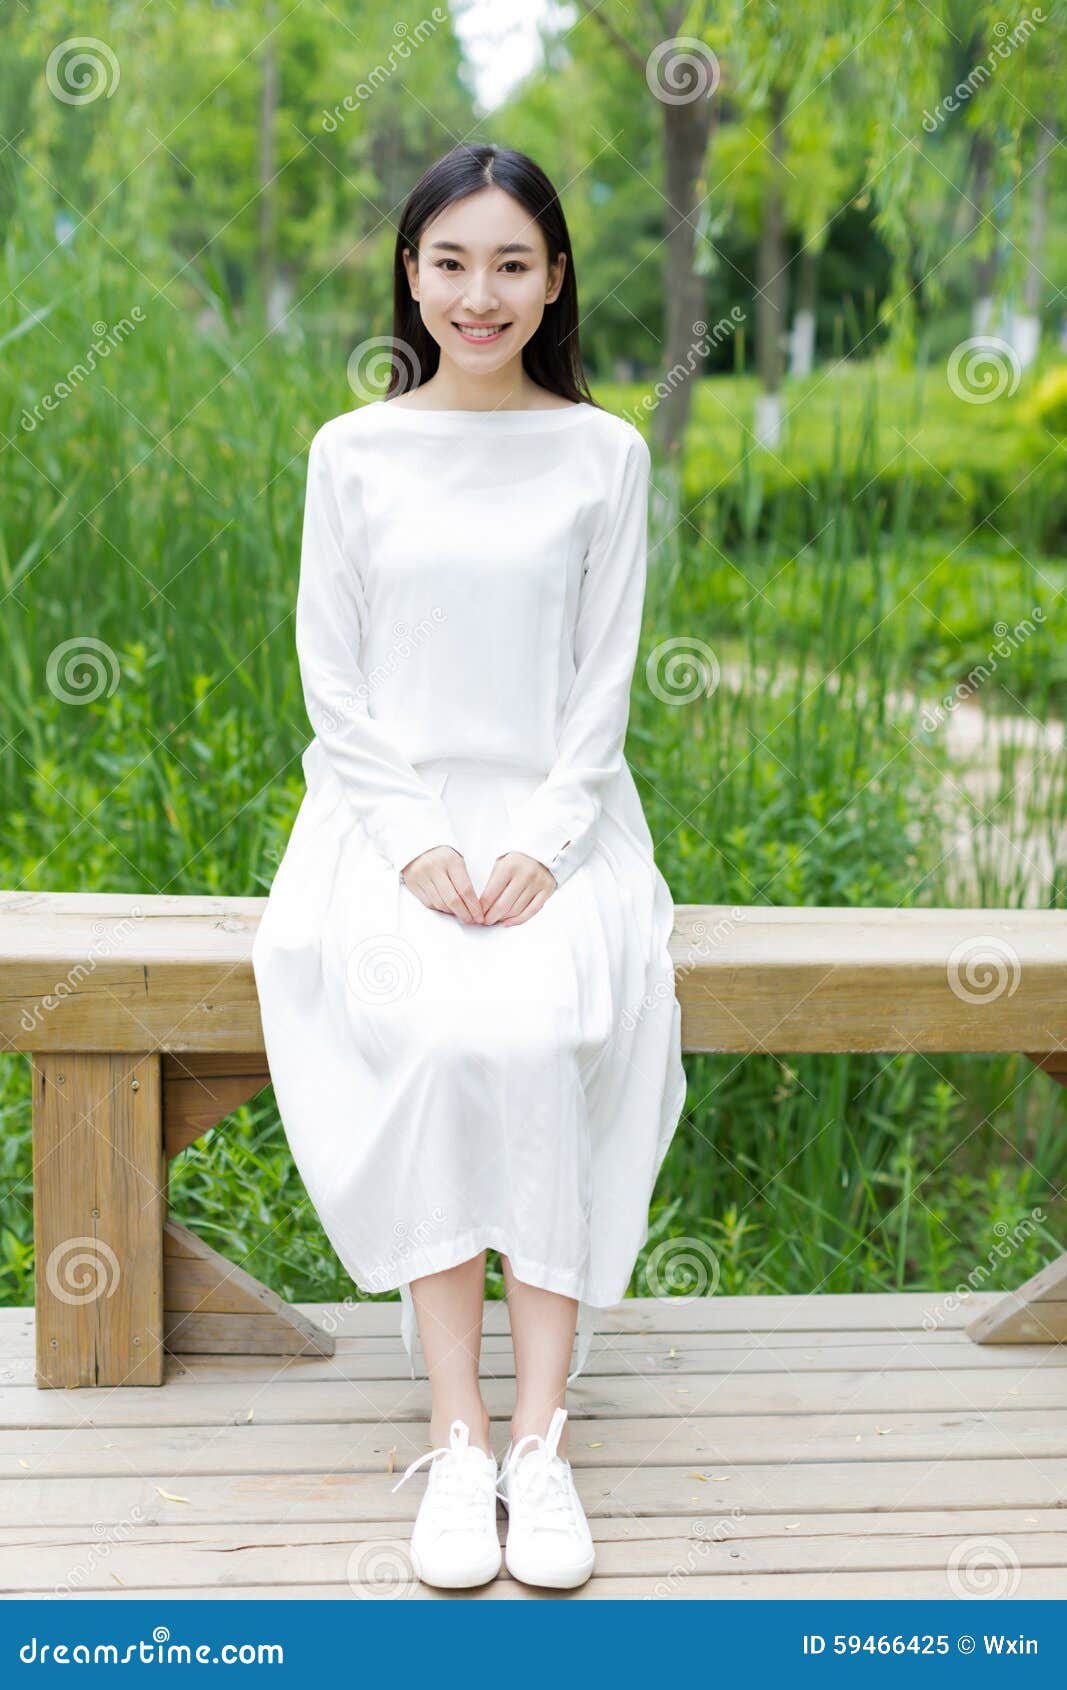 Chinese Girl Wearing a White Dress Stock Image - Image of field, portrait:  59466425